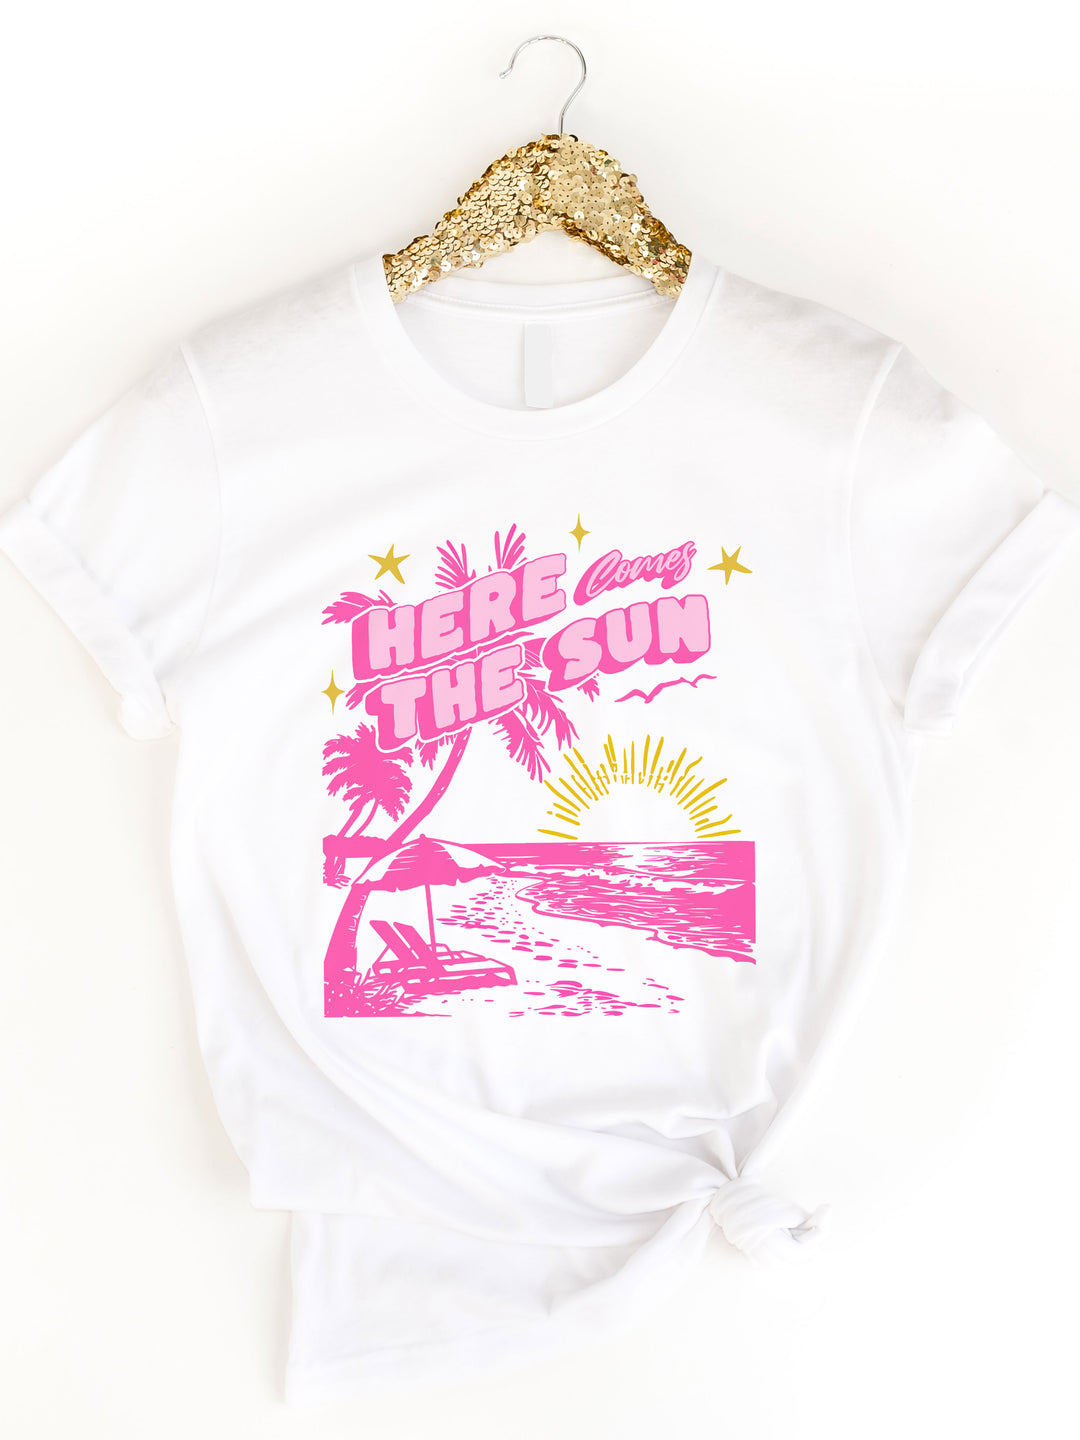 Here Comes the Sun Beach Graphic Tee